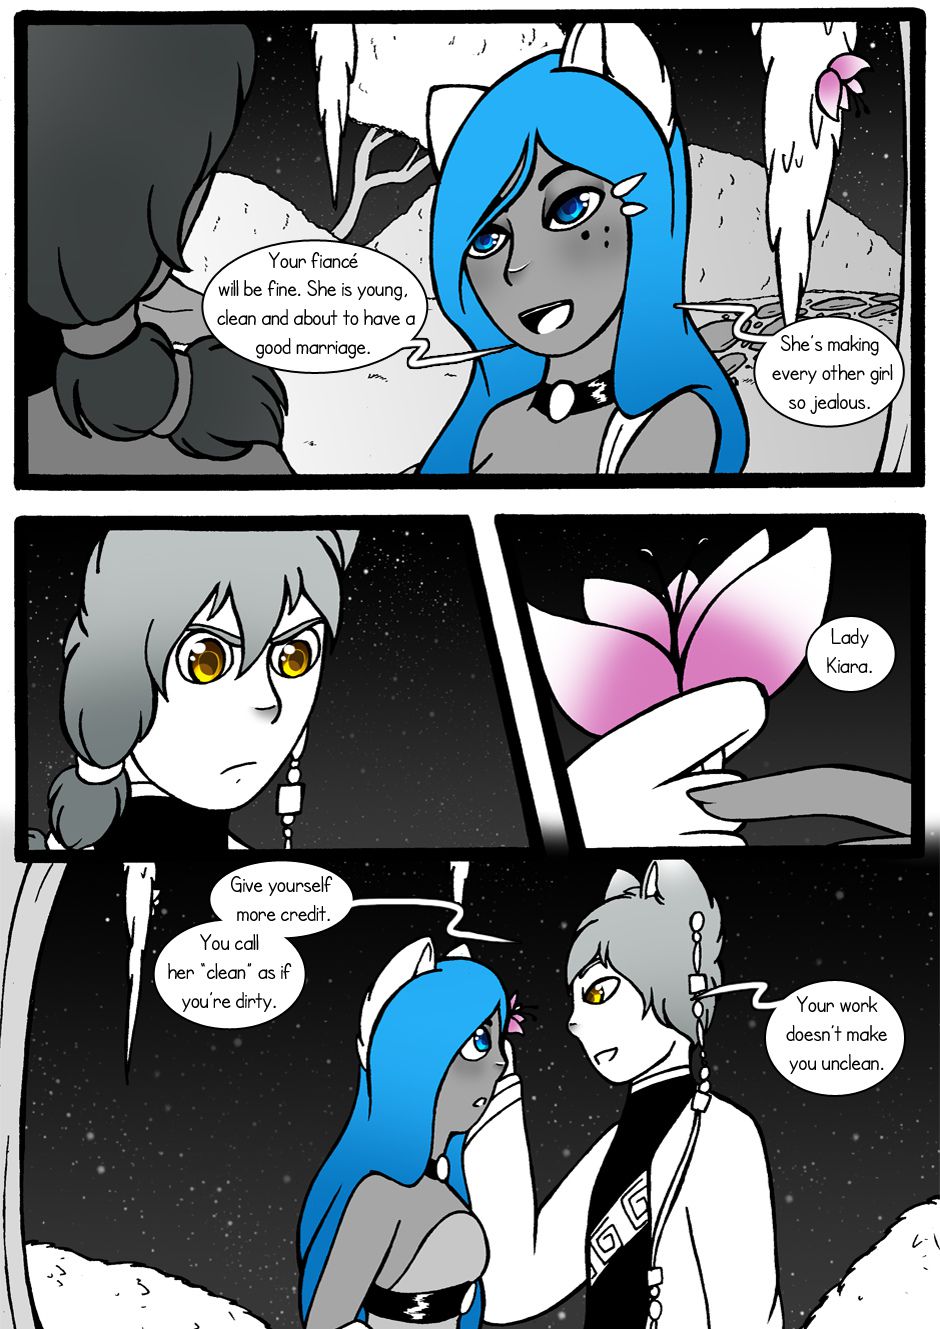 [Jeny-jen94] Between Kings and Queens [Ongoing] 83